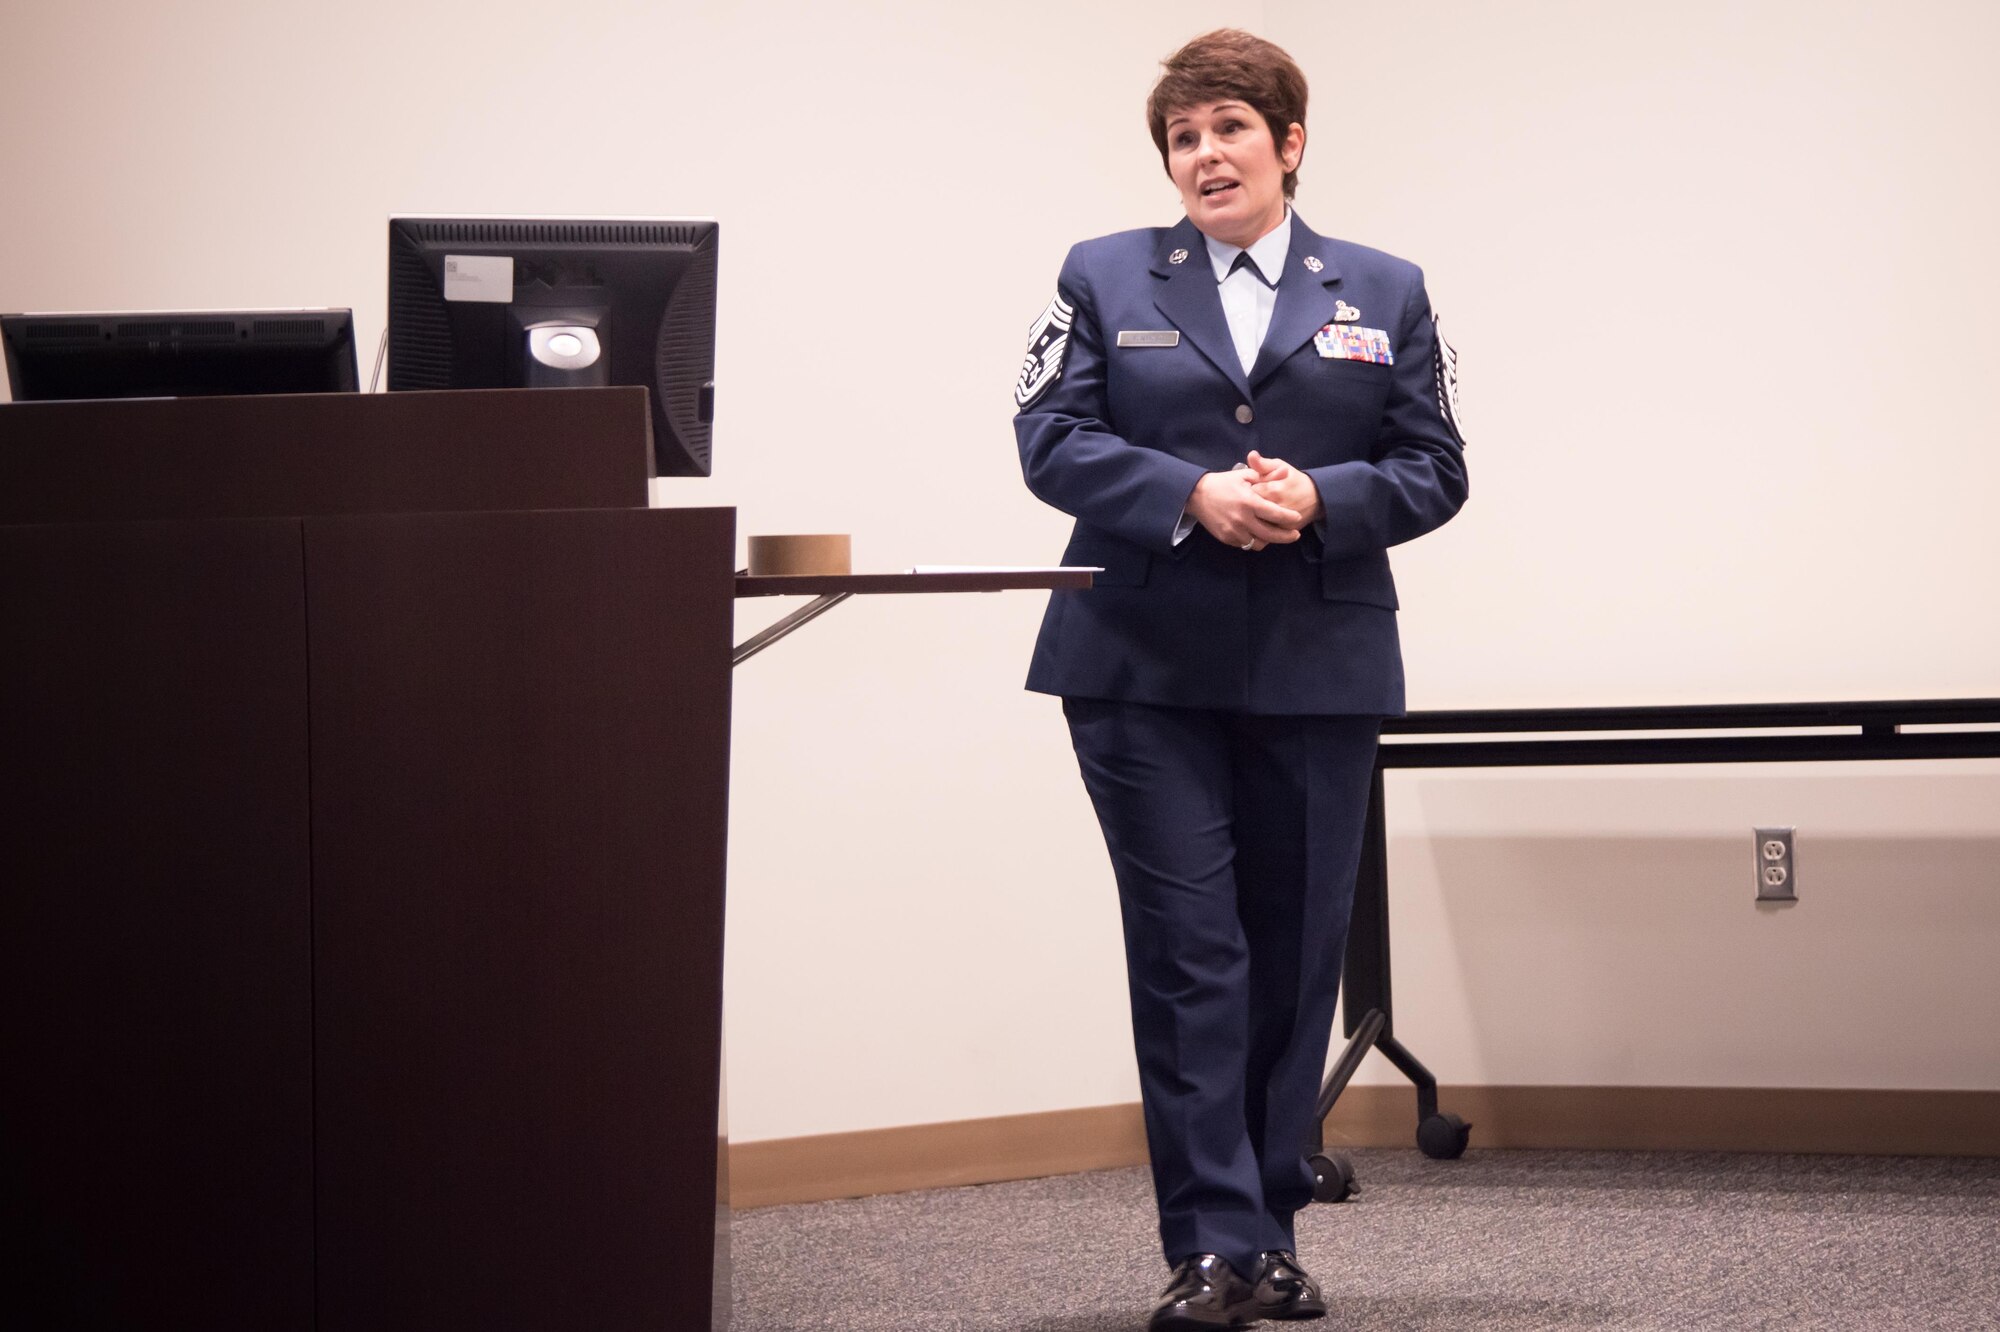 Chief Master Sgt. Michelle Santiago, 403rd Maintenance Squadron first sergeant, speaks at her promotion ceremony Feb. 11 at Keesler Air Force Base, Mississippi. (U.S. Air Force photo/Staff Sgt. Heather Heiney)